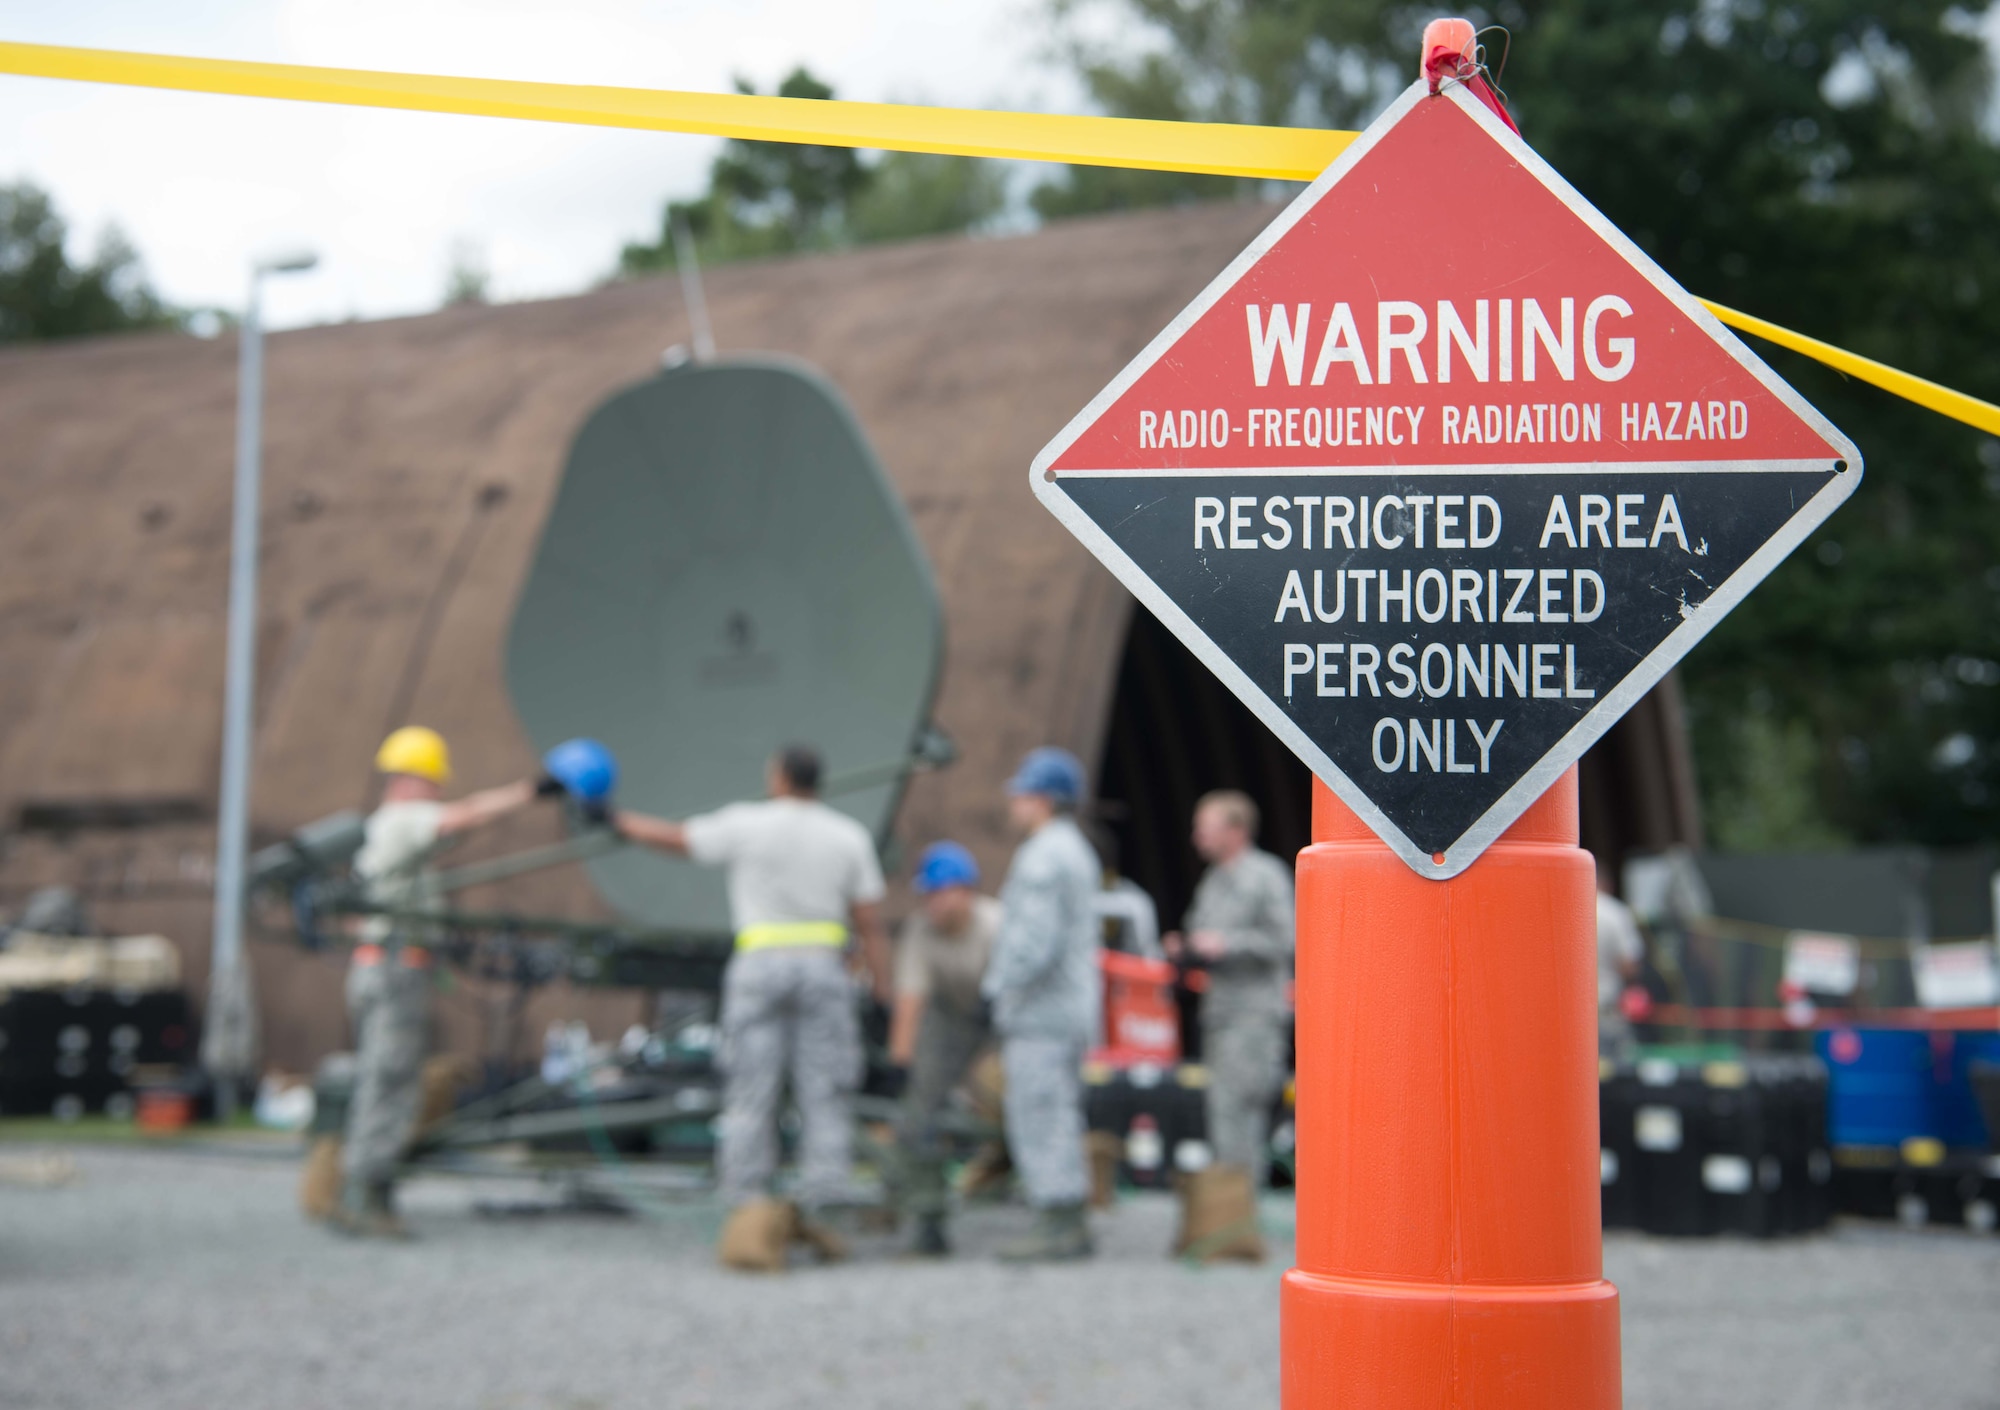 An area is cordoned off due to radiation hazards as U.S. Airmen prepare an antenna to transmit during Exercise Lending Hand on Ramstein Air Base, Germany, Aug. 21, 2017.